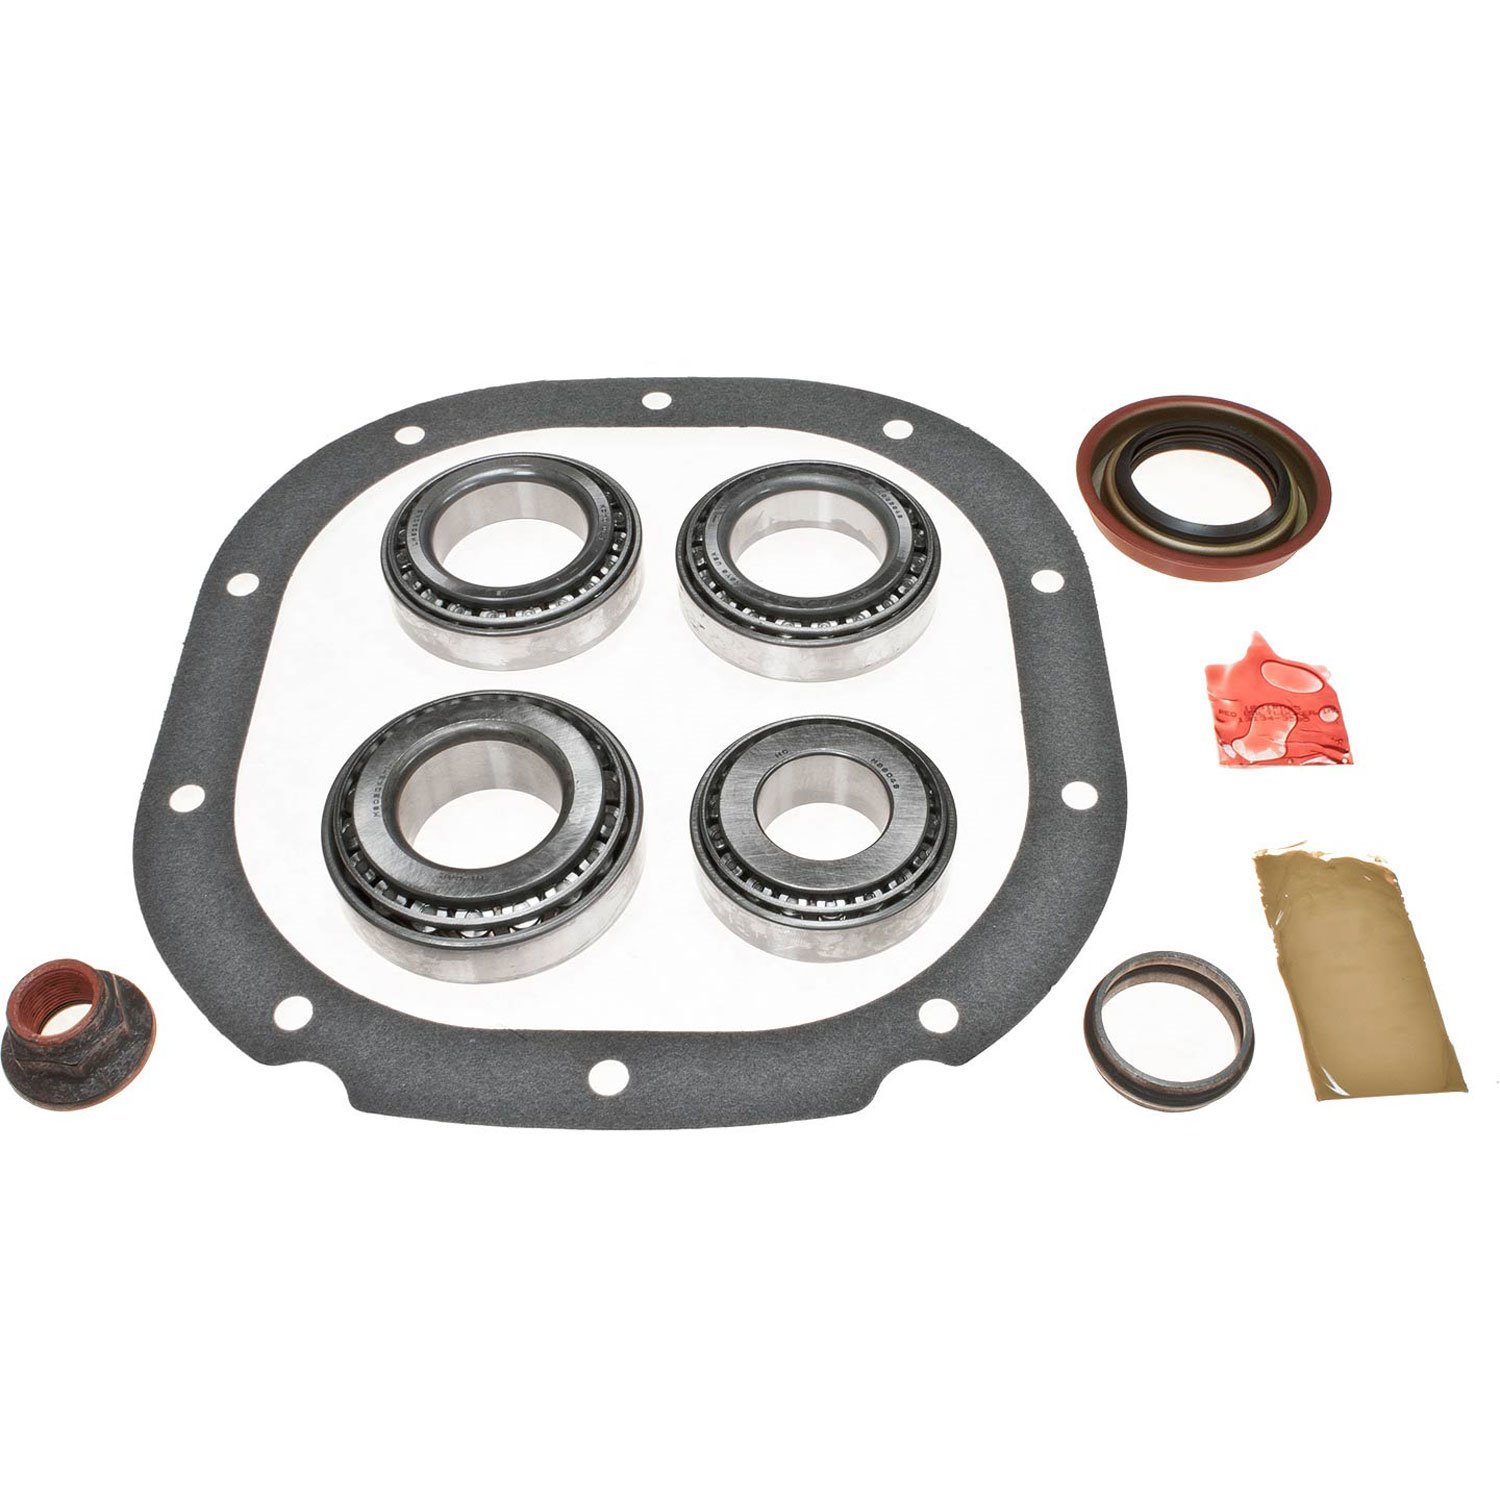 Differential Bearing Kit Ford 8.8 in. 10-bolt -